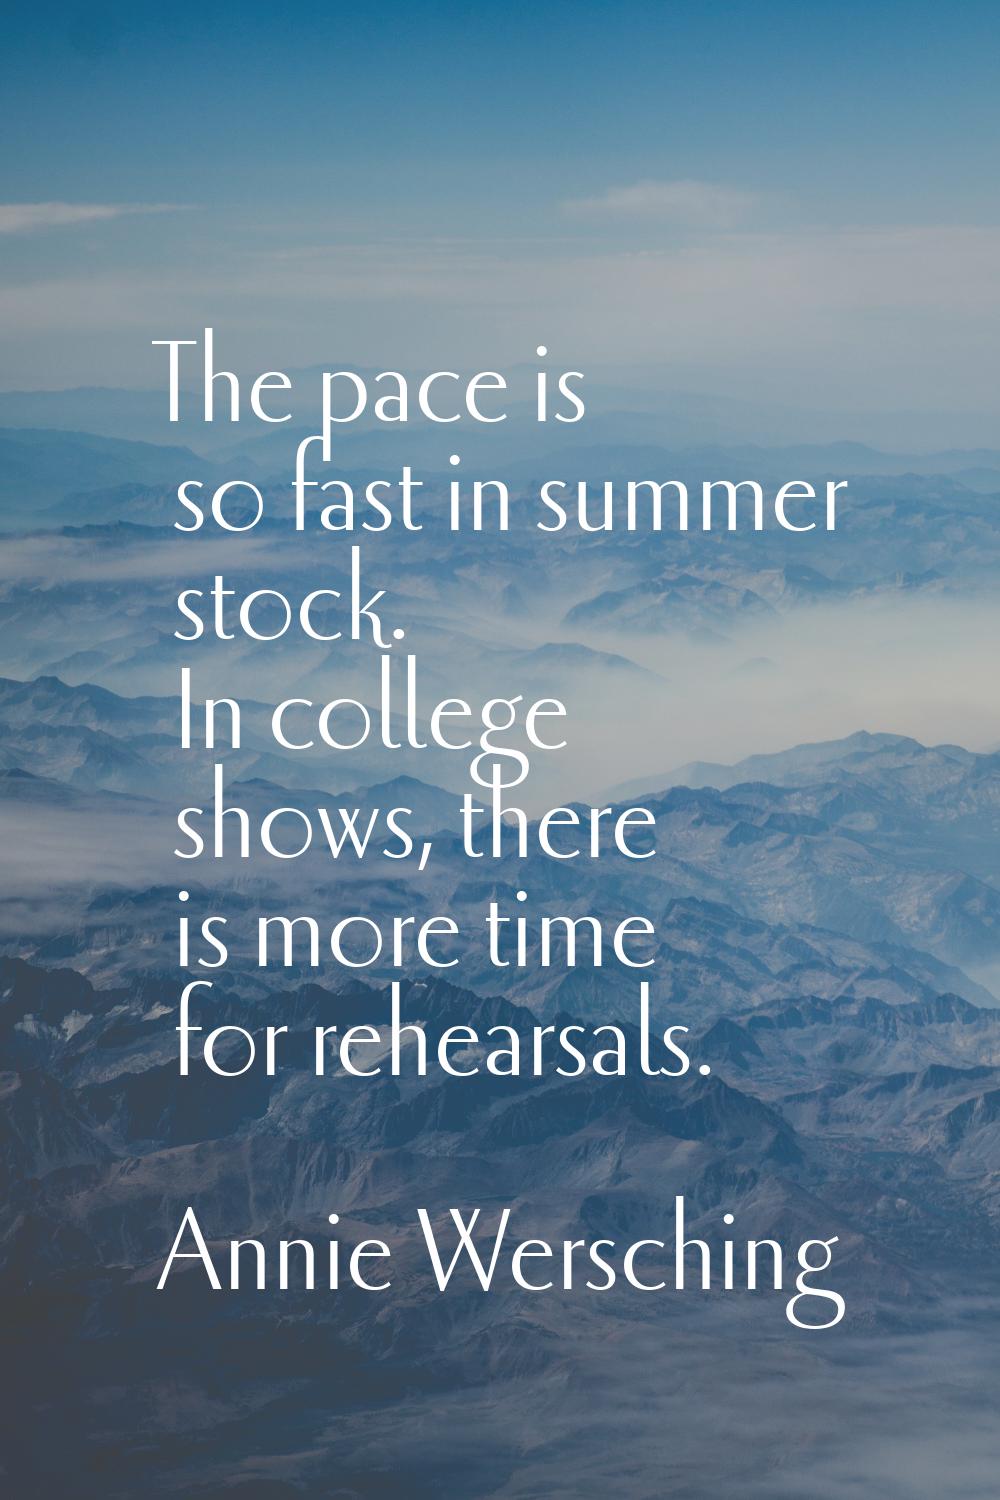 The pace is so fast in summer stock. In college shows, there is more time for rehearsals.